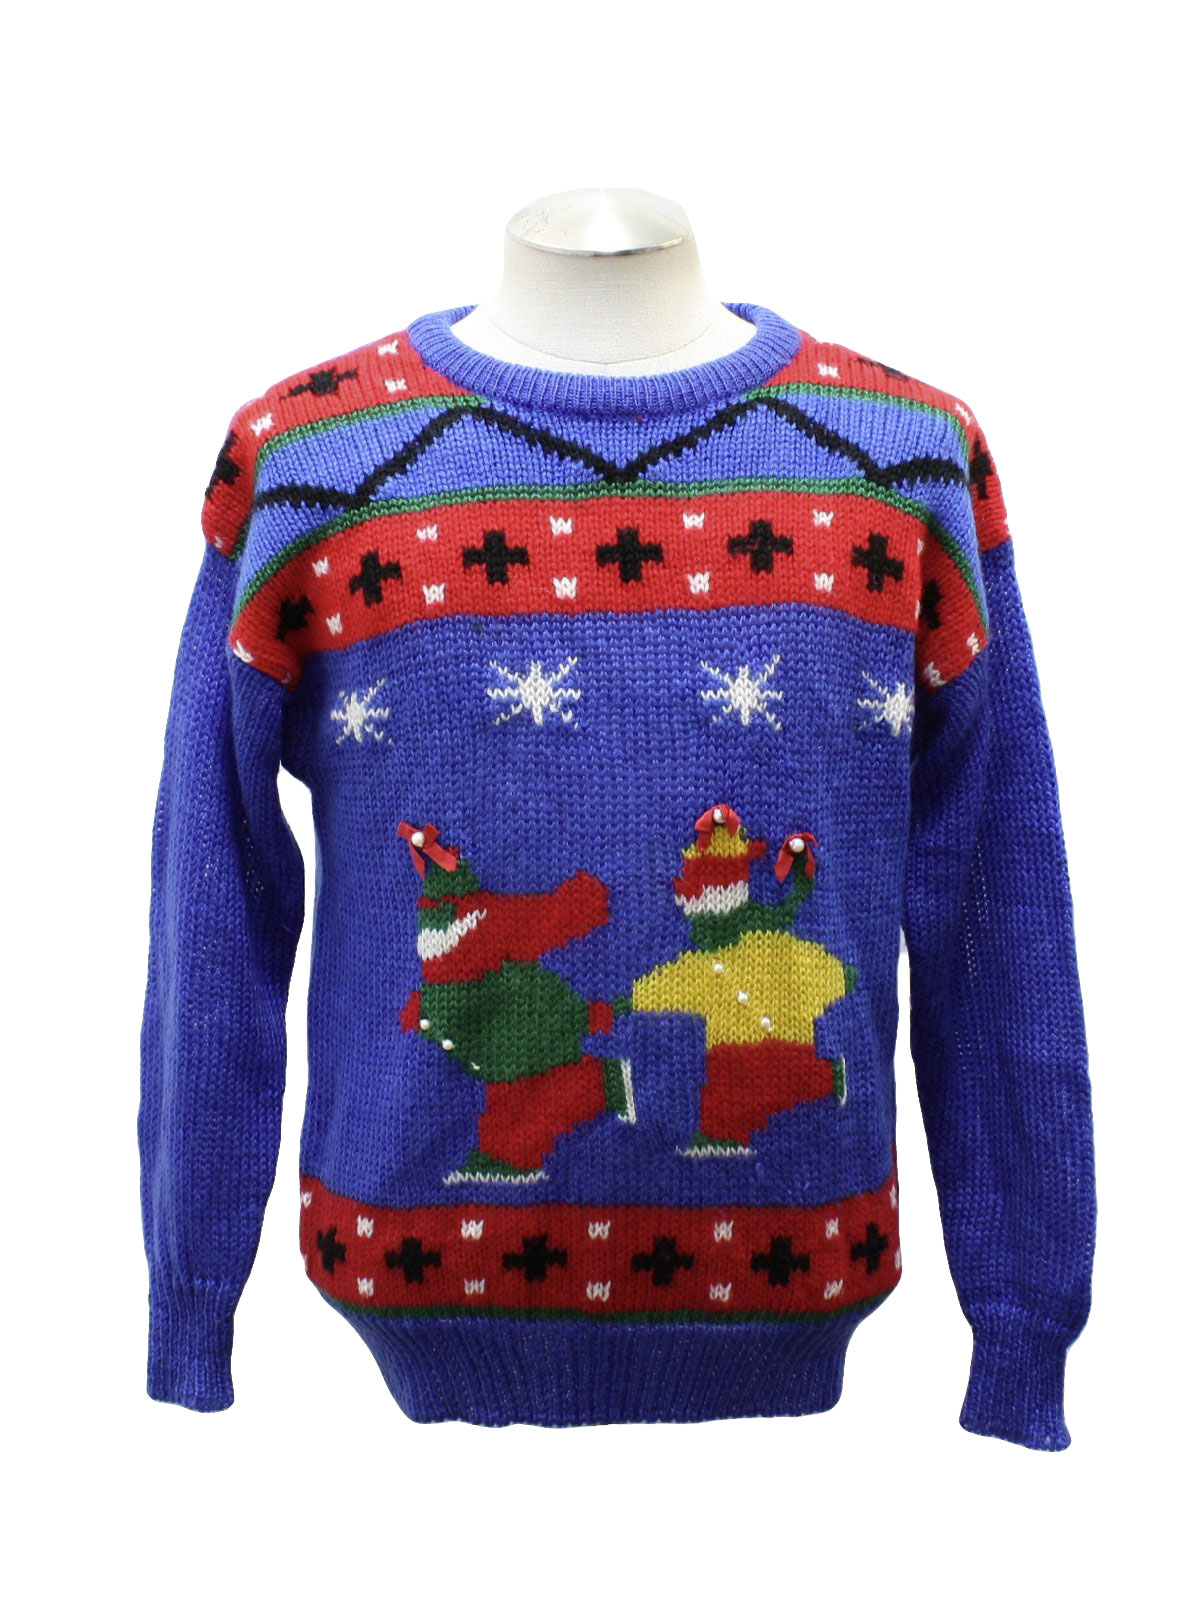 Retro 80s Ugly Christmas Sweater (Nut Cracker) : 80s authentic vintage ...